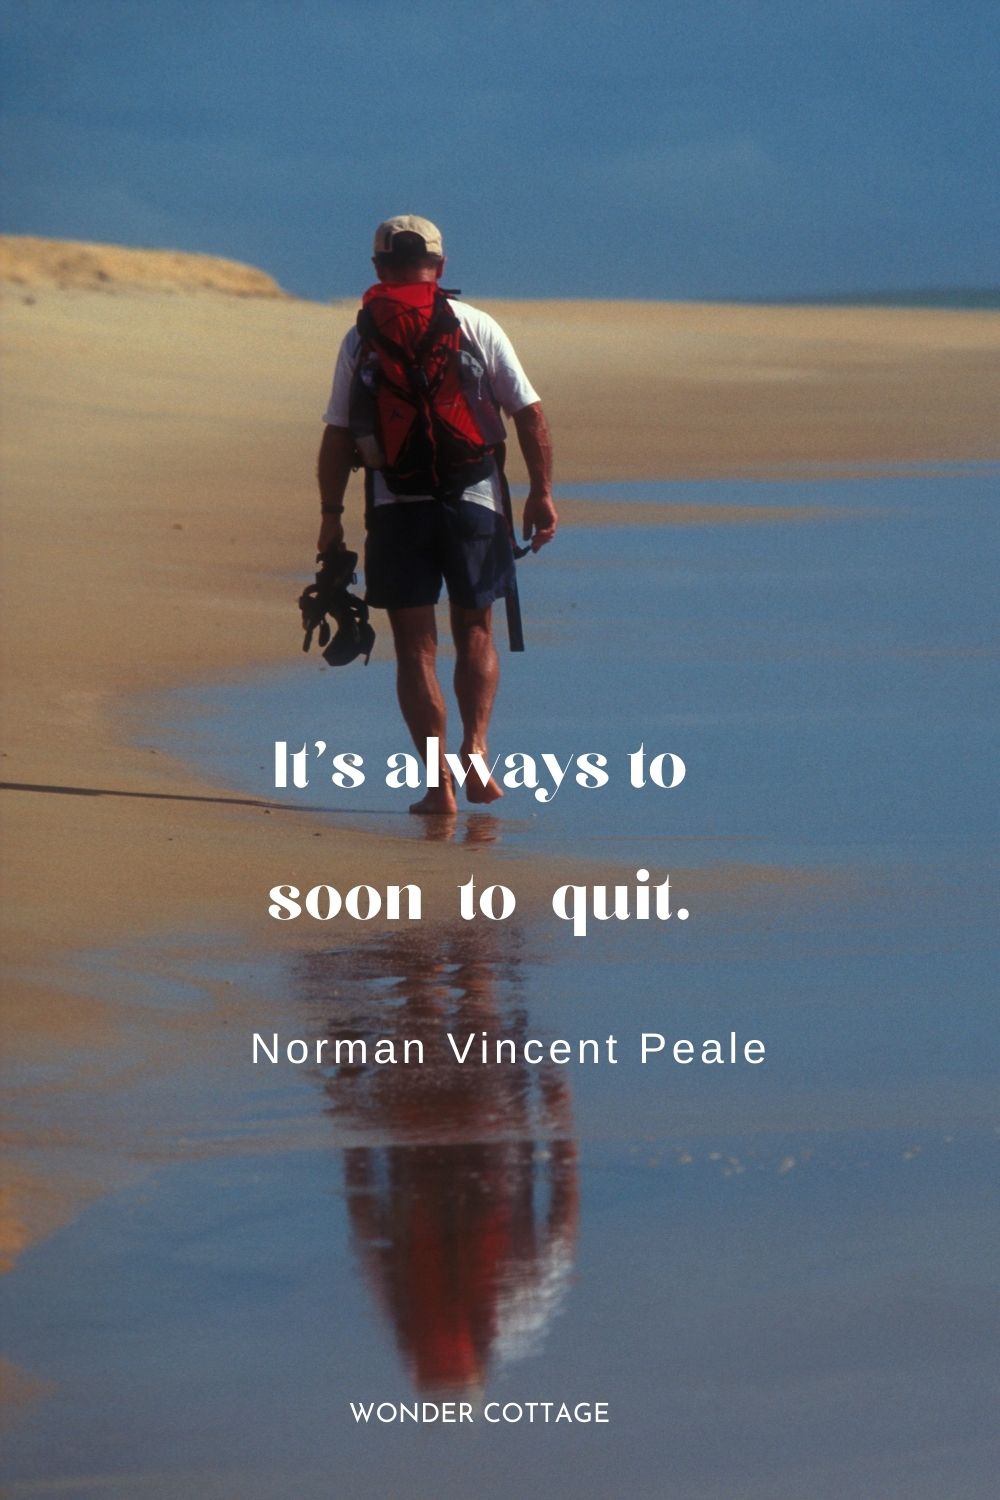 It’s always to soon to quit.  Norman Vincent Peale